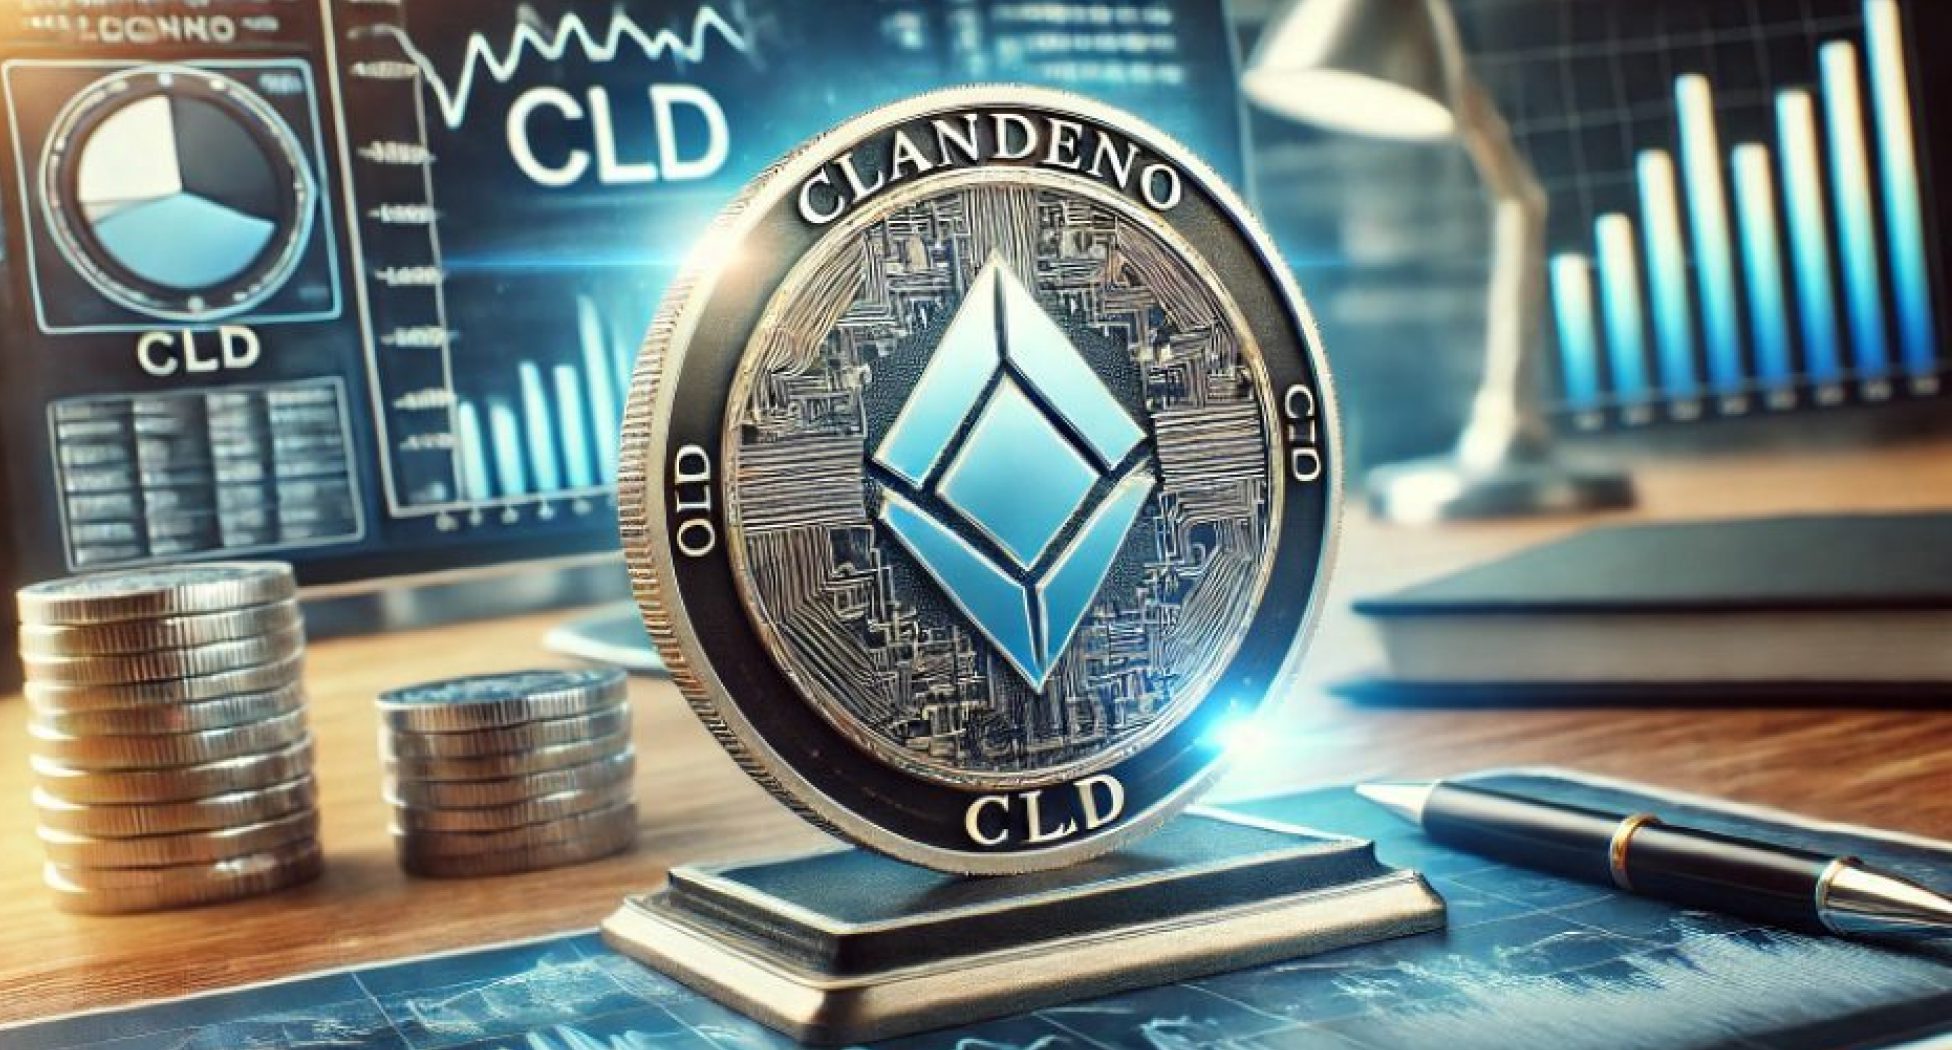 New ICO Clandeno (CLD) Launches but is PayPal Behind it? Binance Coin (BNB) & NEAR Protocol Prices Woes Continue